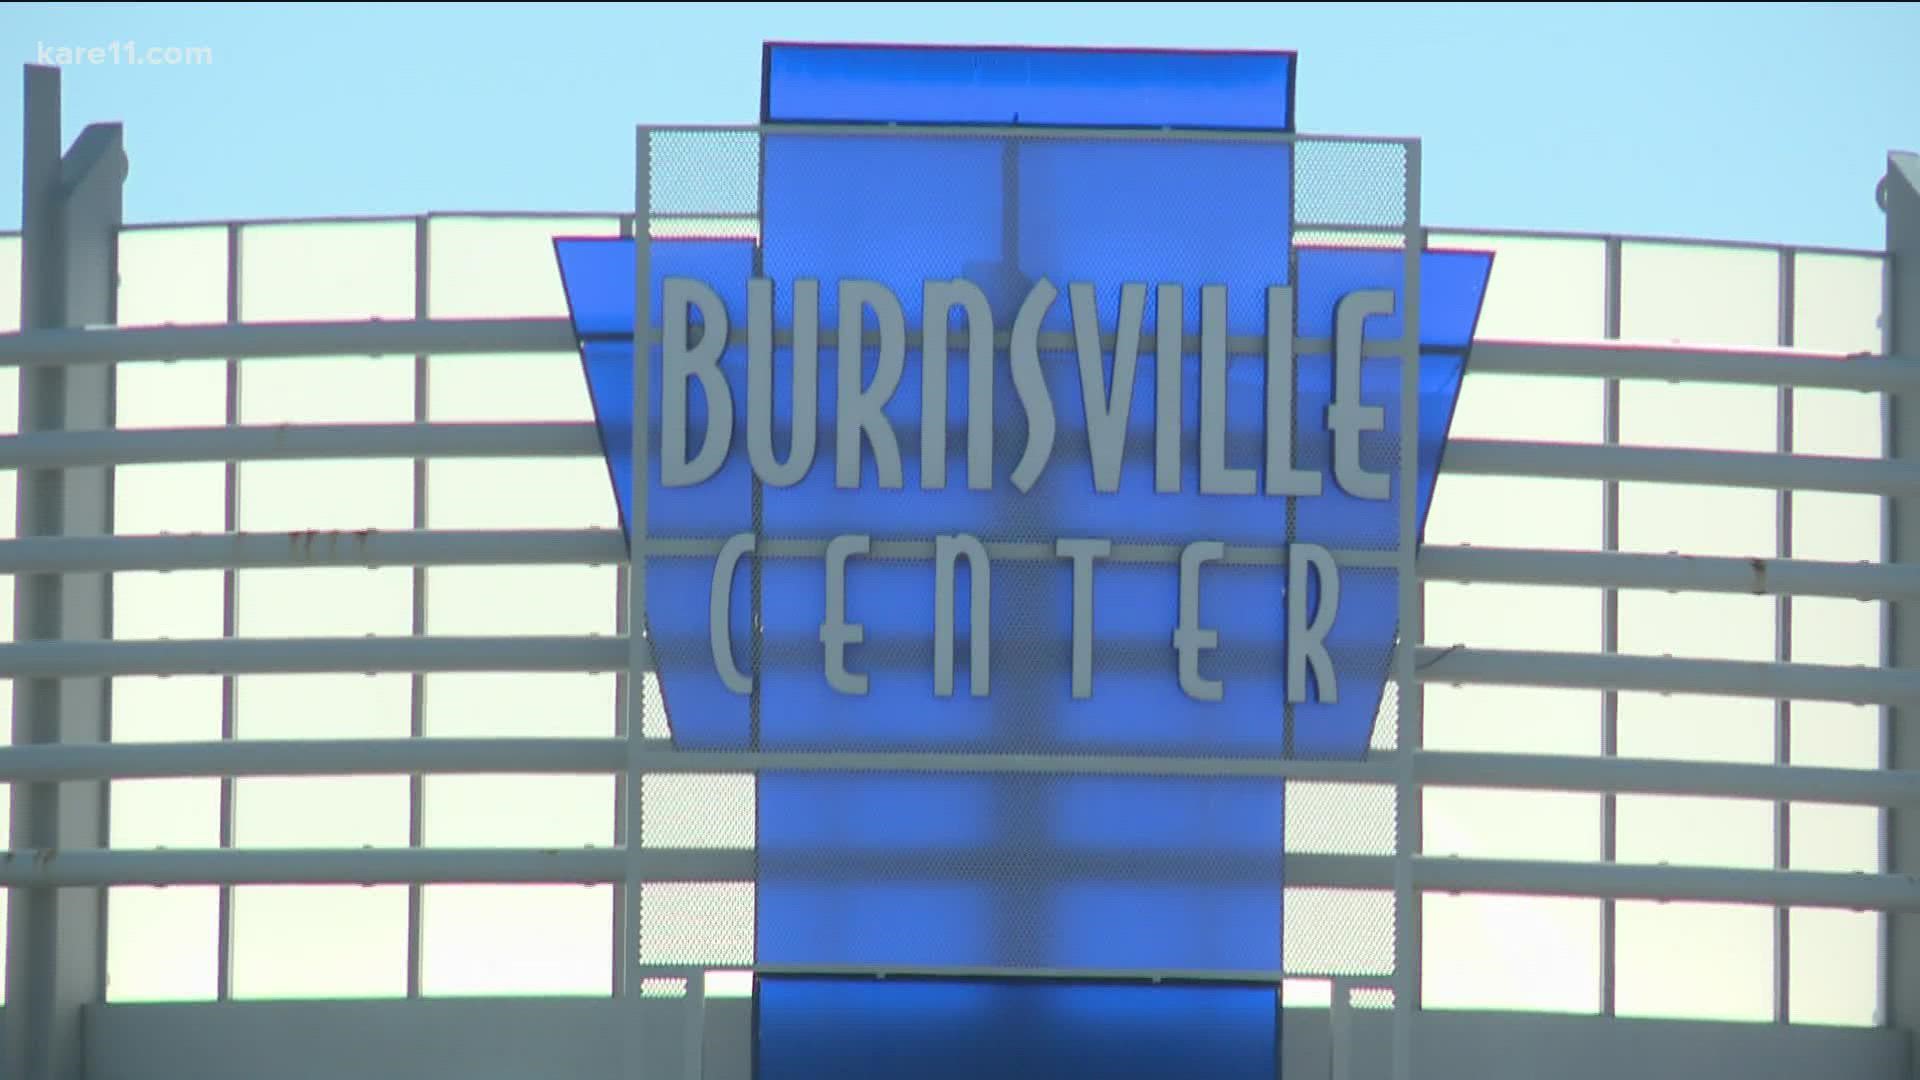 Consumer habits are changing -- and malls like Burnsville Center are adjusting.